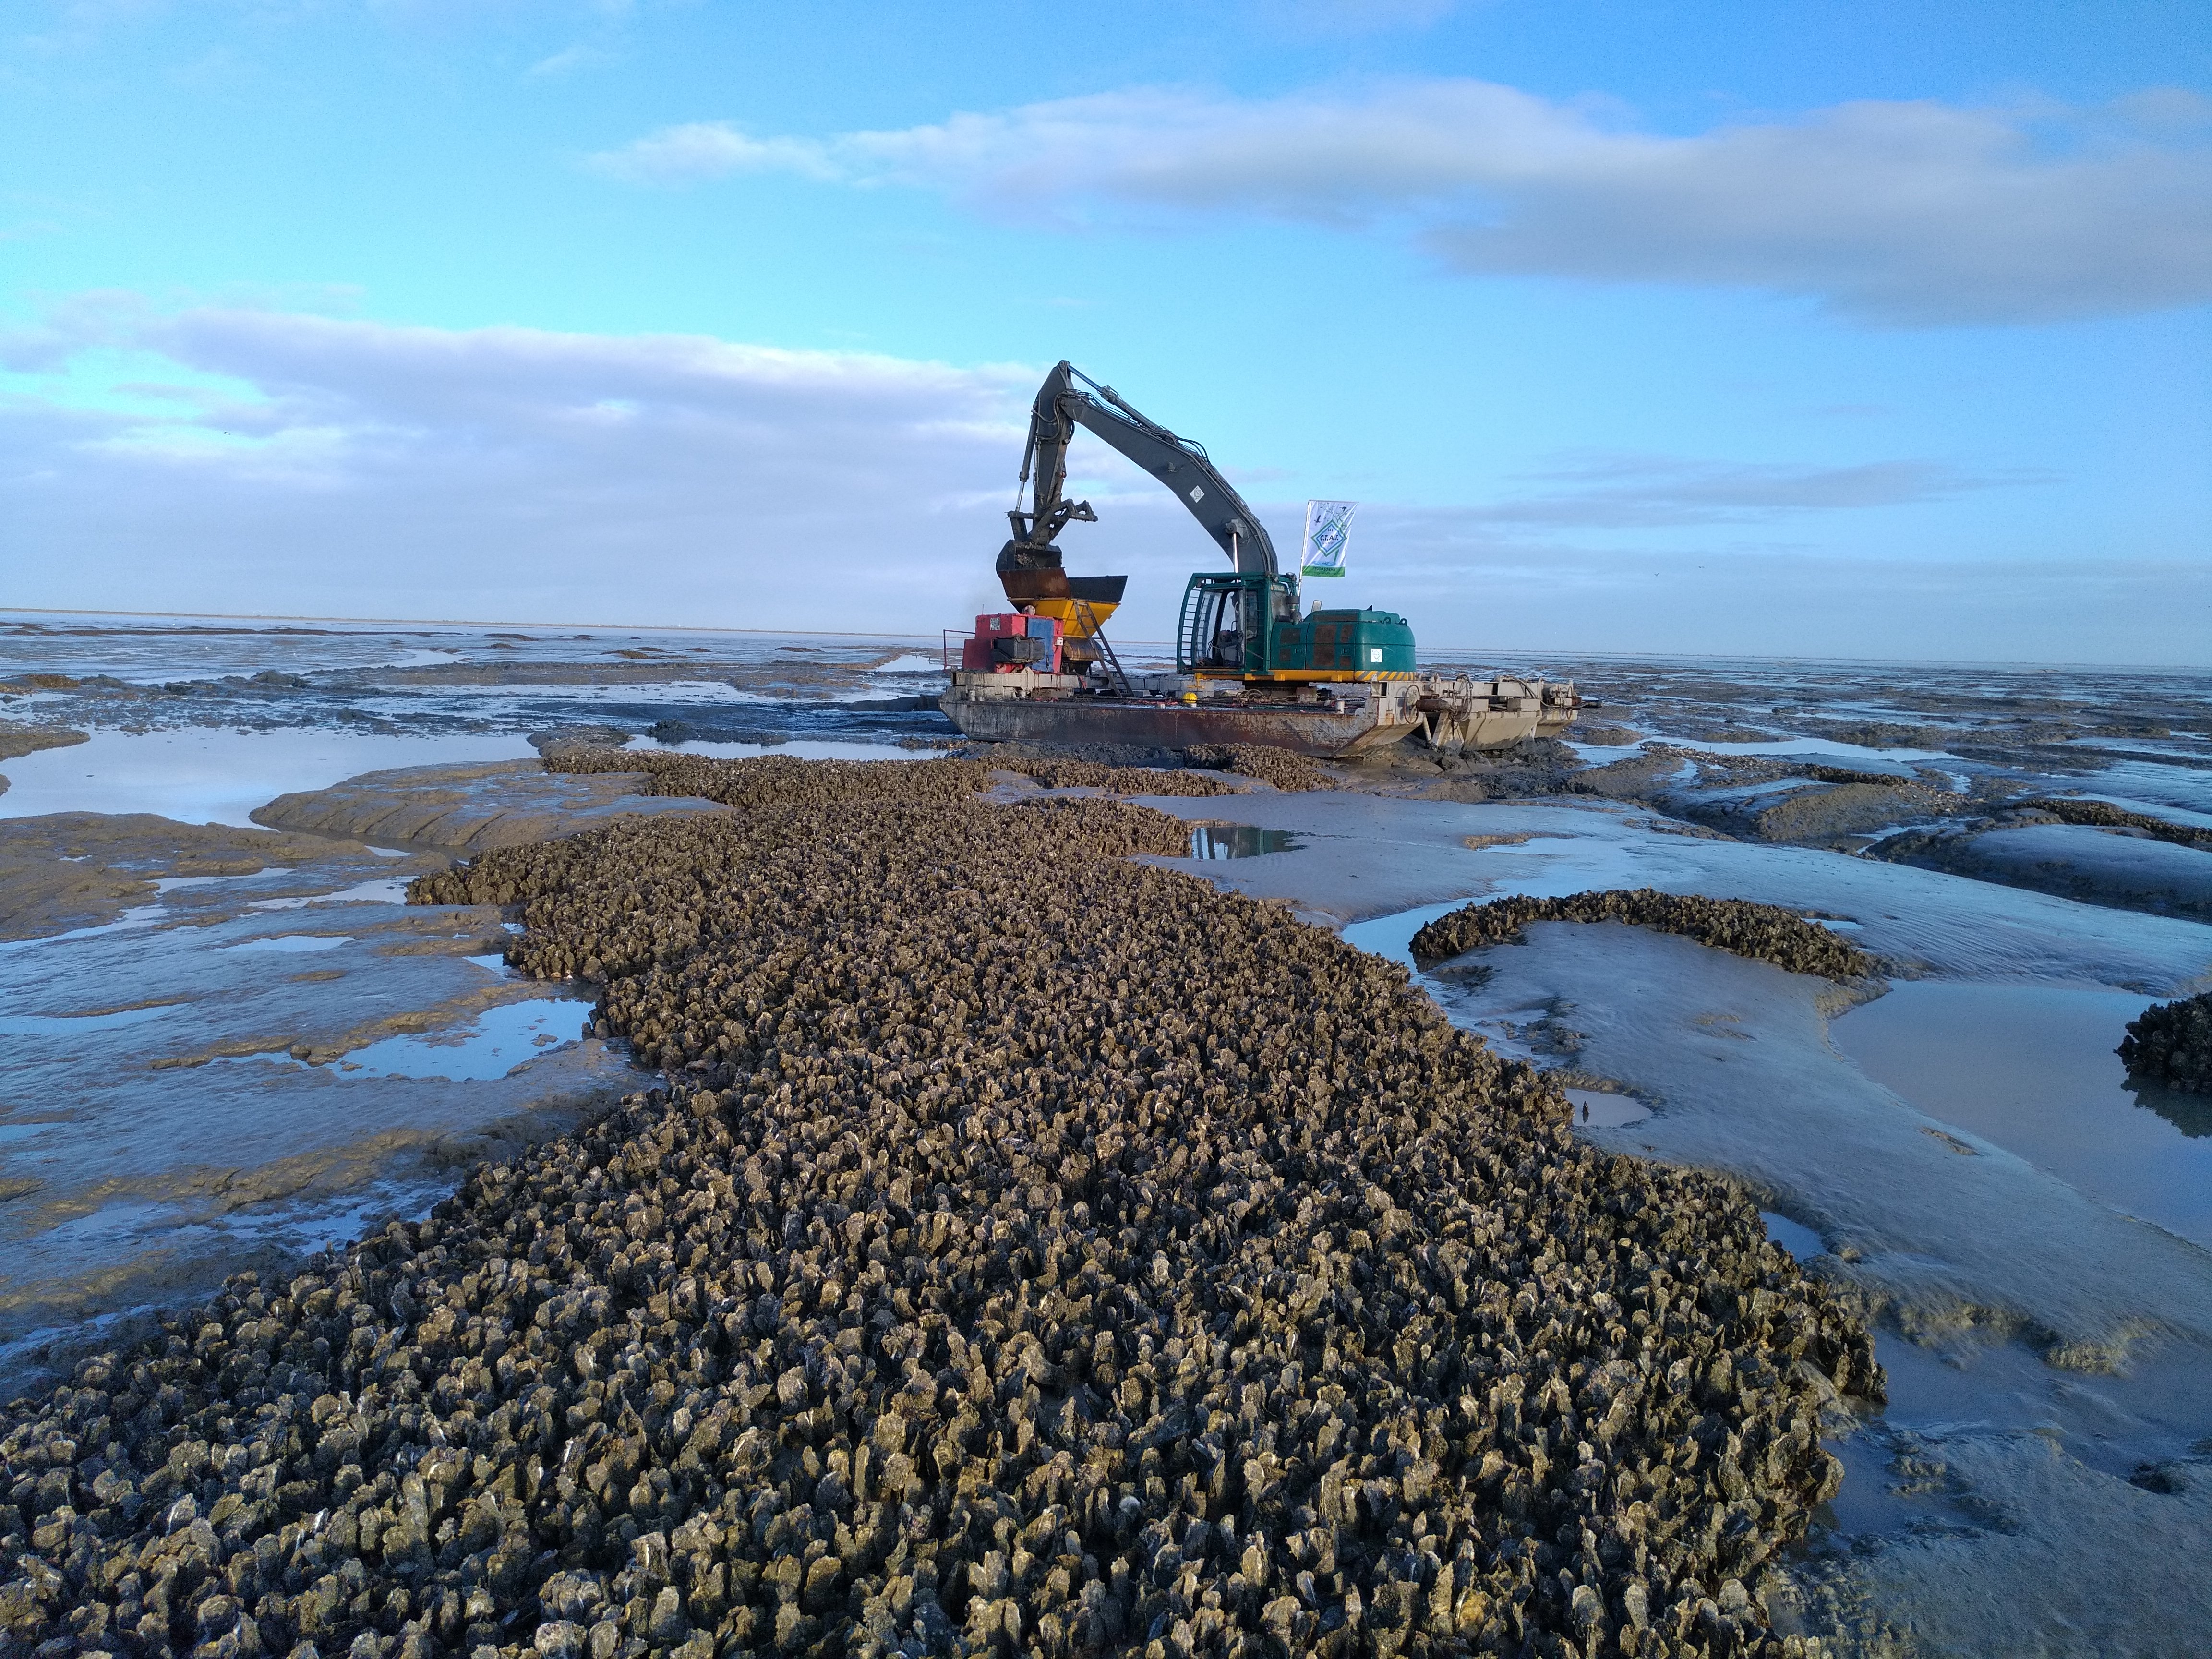 Oyster bed removal work